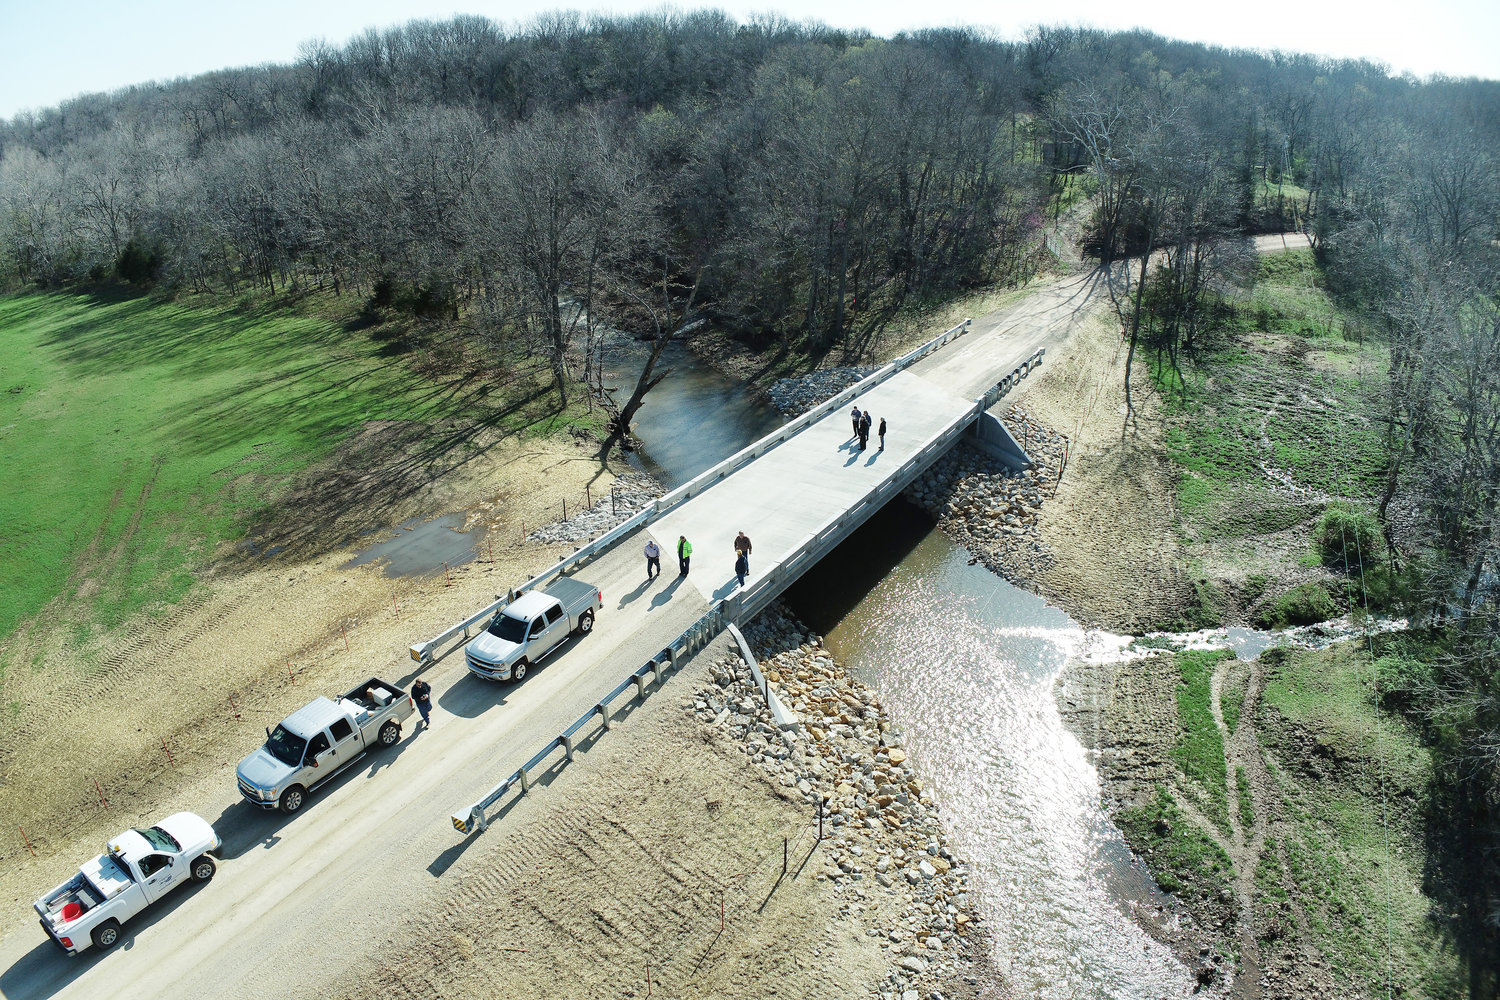 The Maries County Commission, MECO Engineering, MoDOT, and MERA Construction had representatives who gathered at the county’s recently completed new BRO bridge on MCR 608 over the Tavern Creek on the county’s west side.